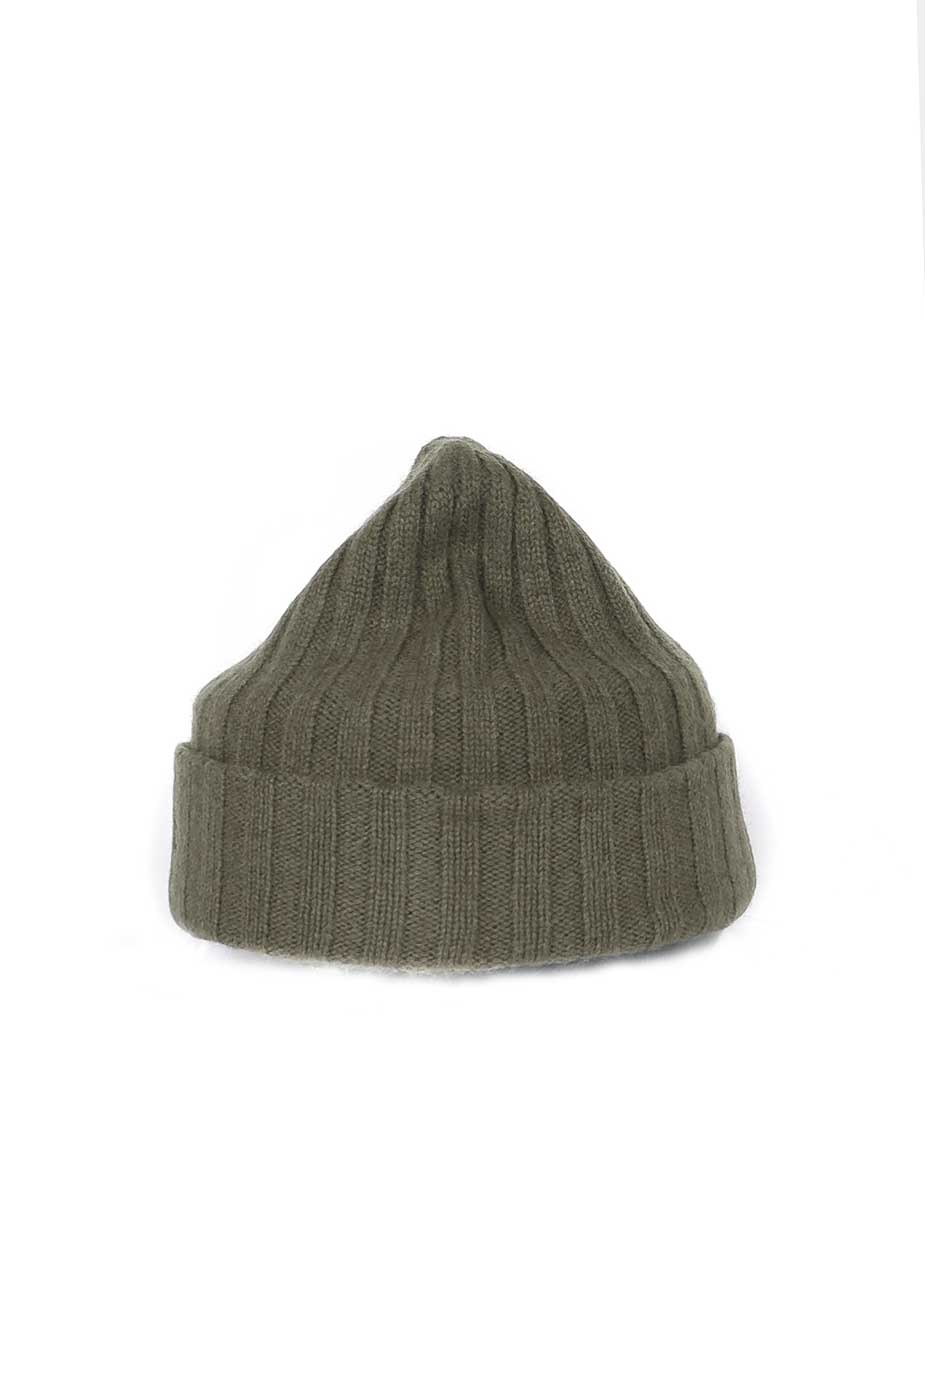 Buy the Stetson Cashmere Beanie in Green at Intro. Spend £50 for free UK delivery. Official stockists. We ship worldwide.